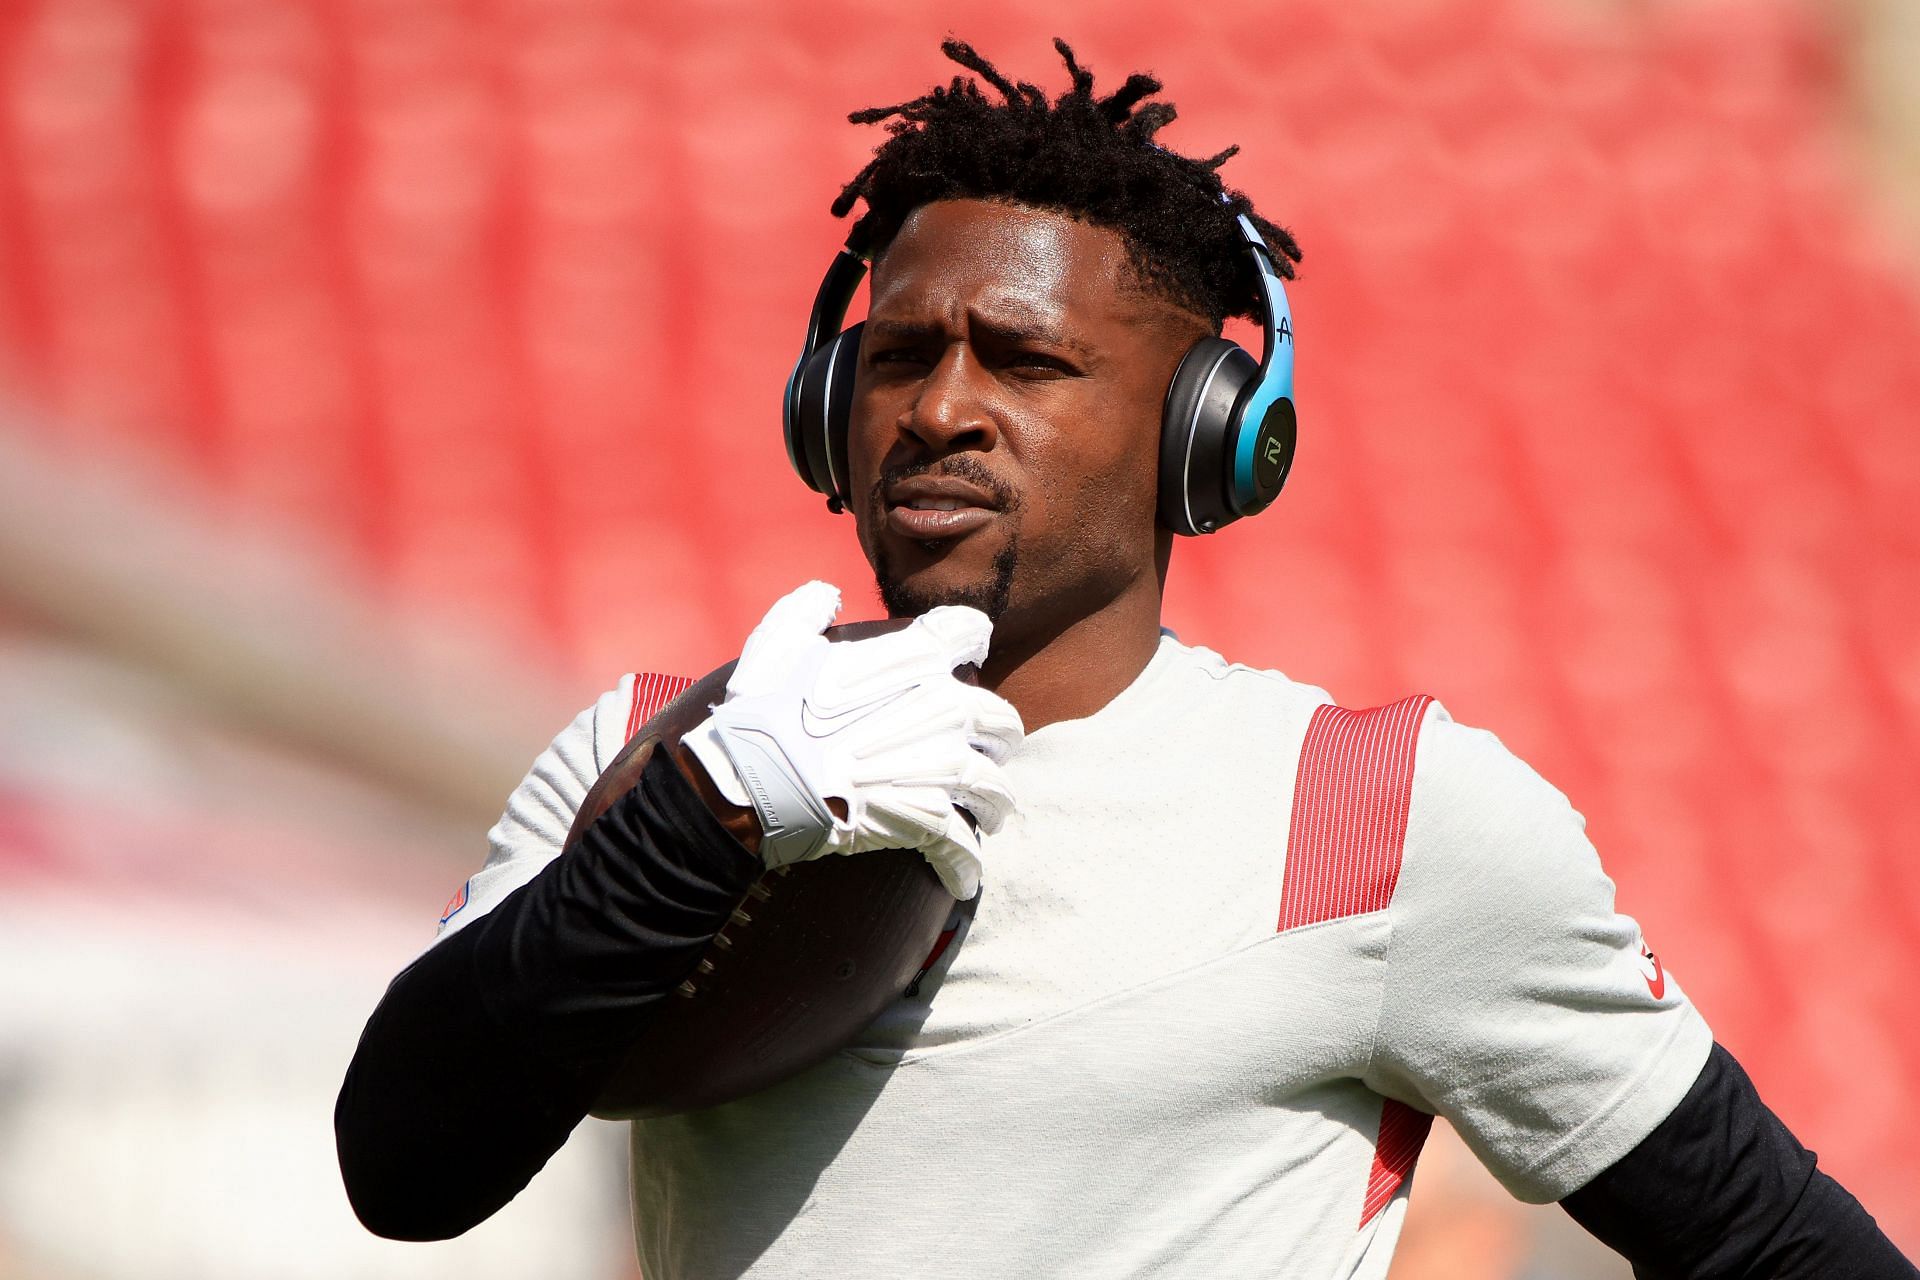 Antonio Brown crosses the line once again, shares sexually